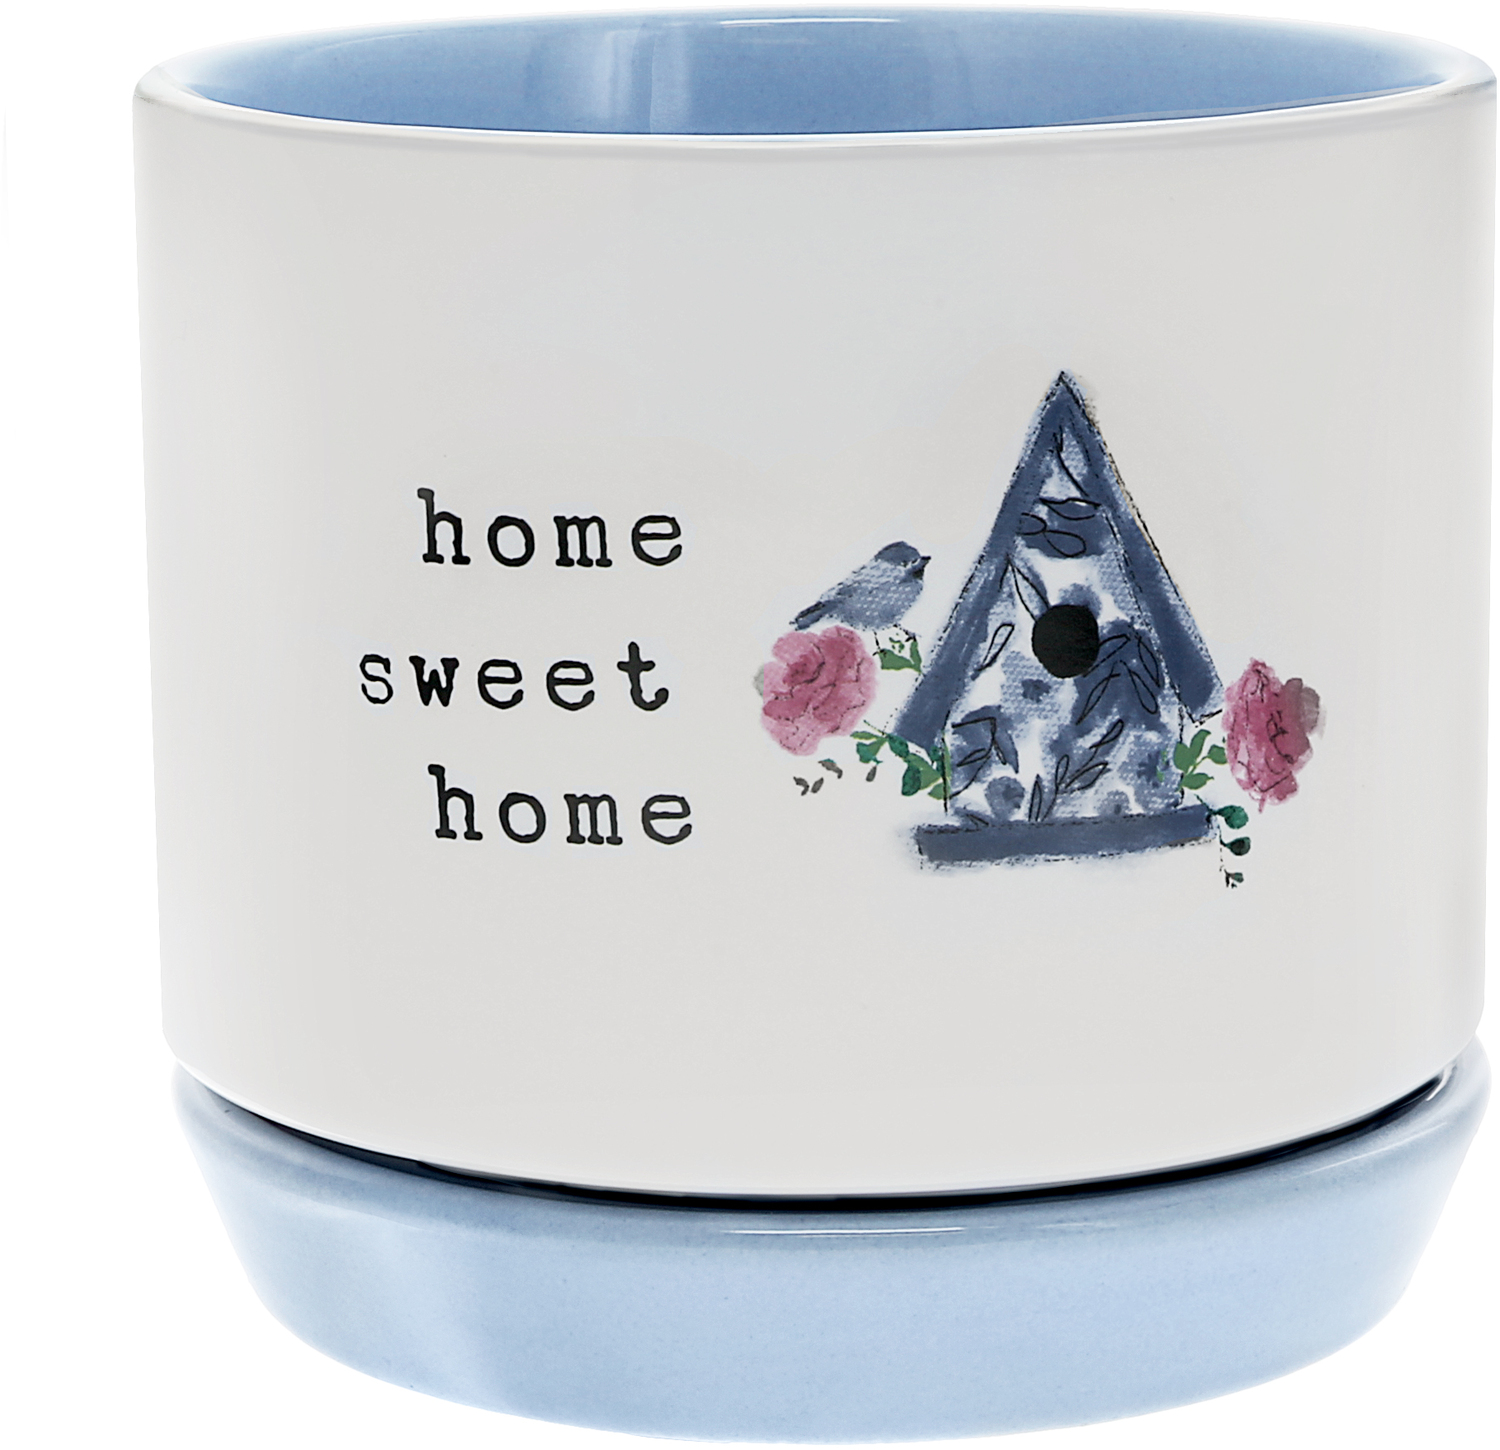 Home by You Make Me Smile -ALW - Home - 4.25" Planter (Holds 4" Planter Pot)